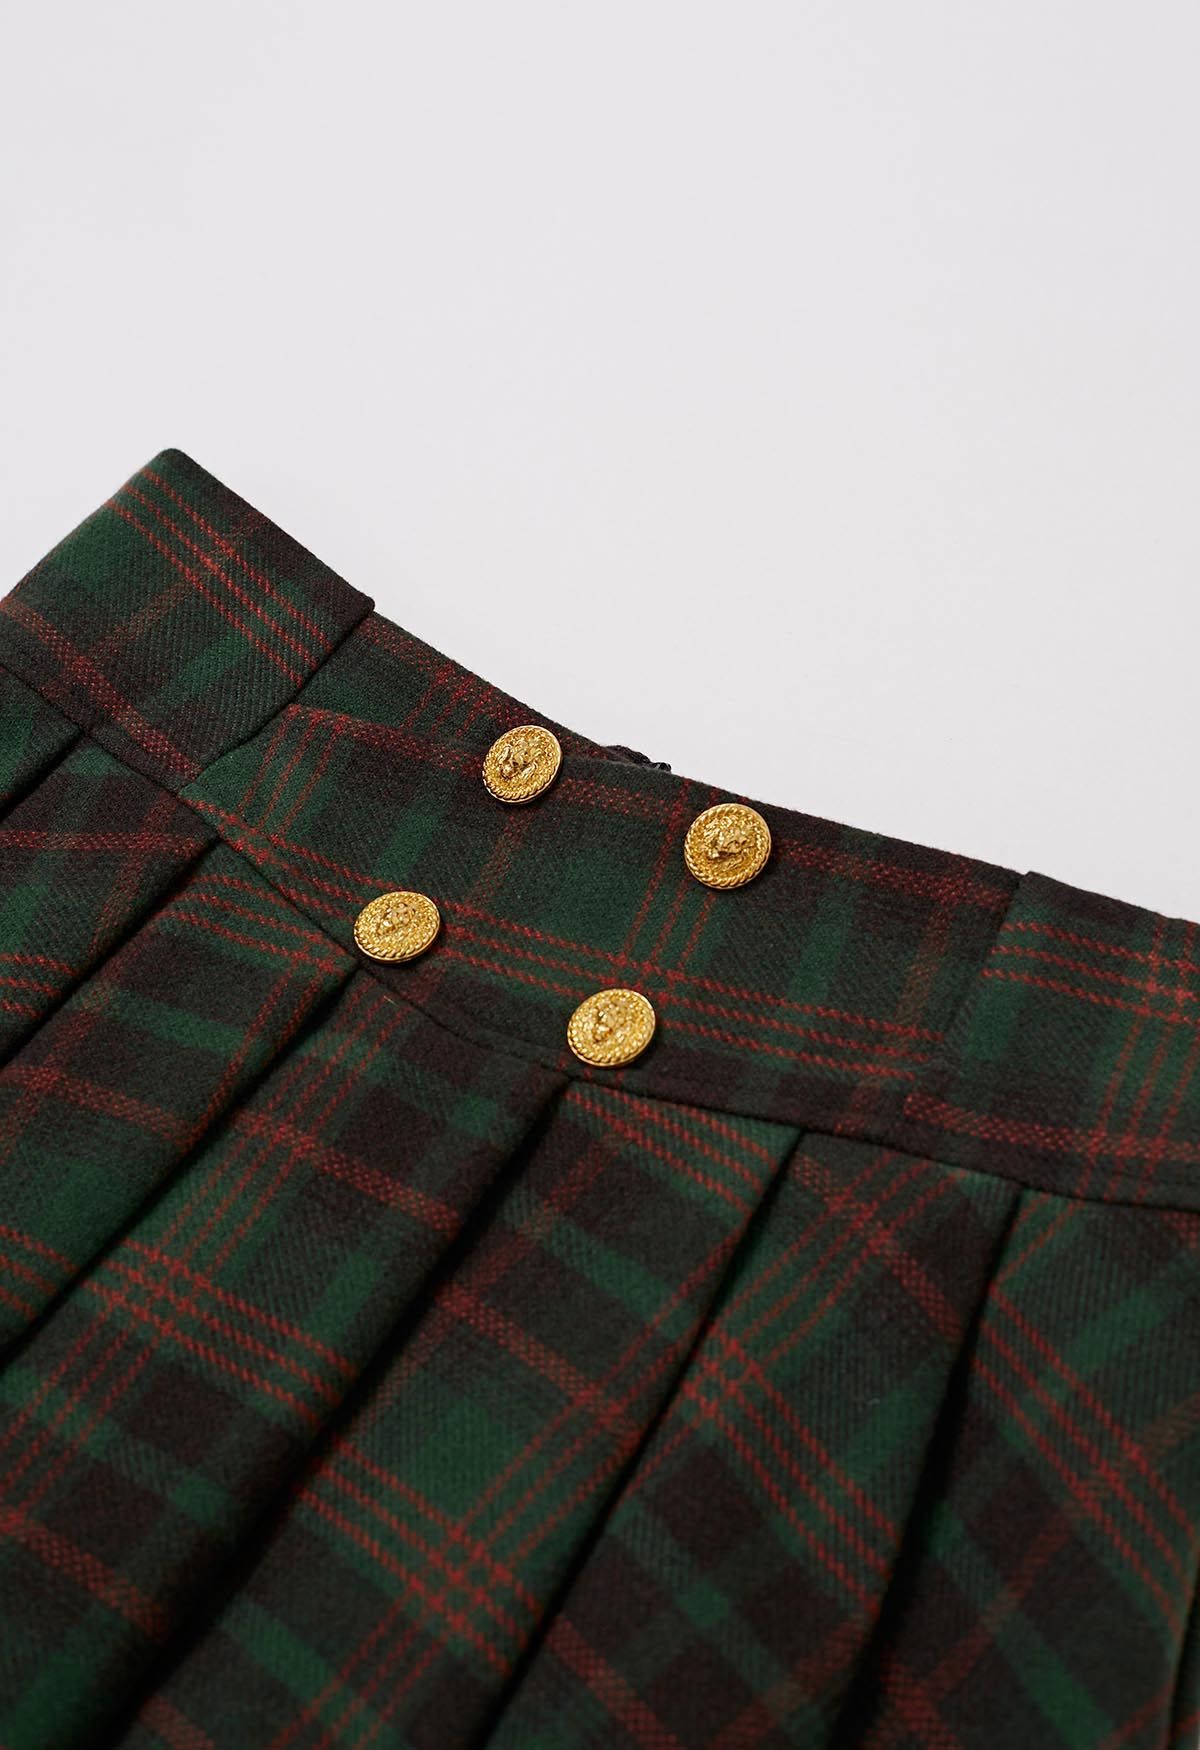 Golden Button Wool-Blend Pleated Mini Skirt in Green Plaid